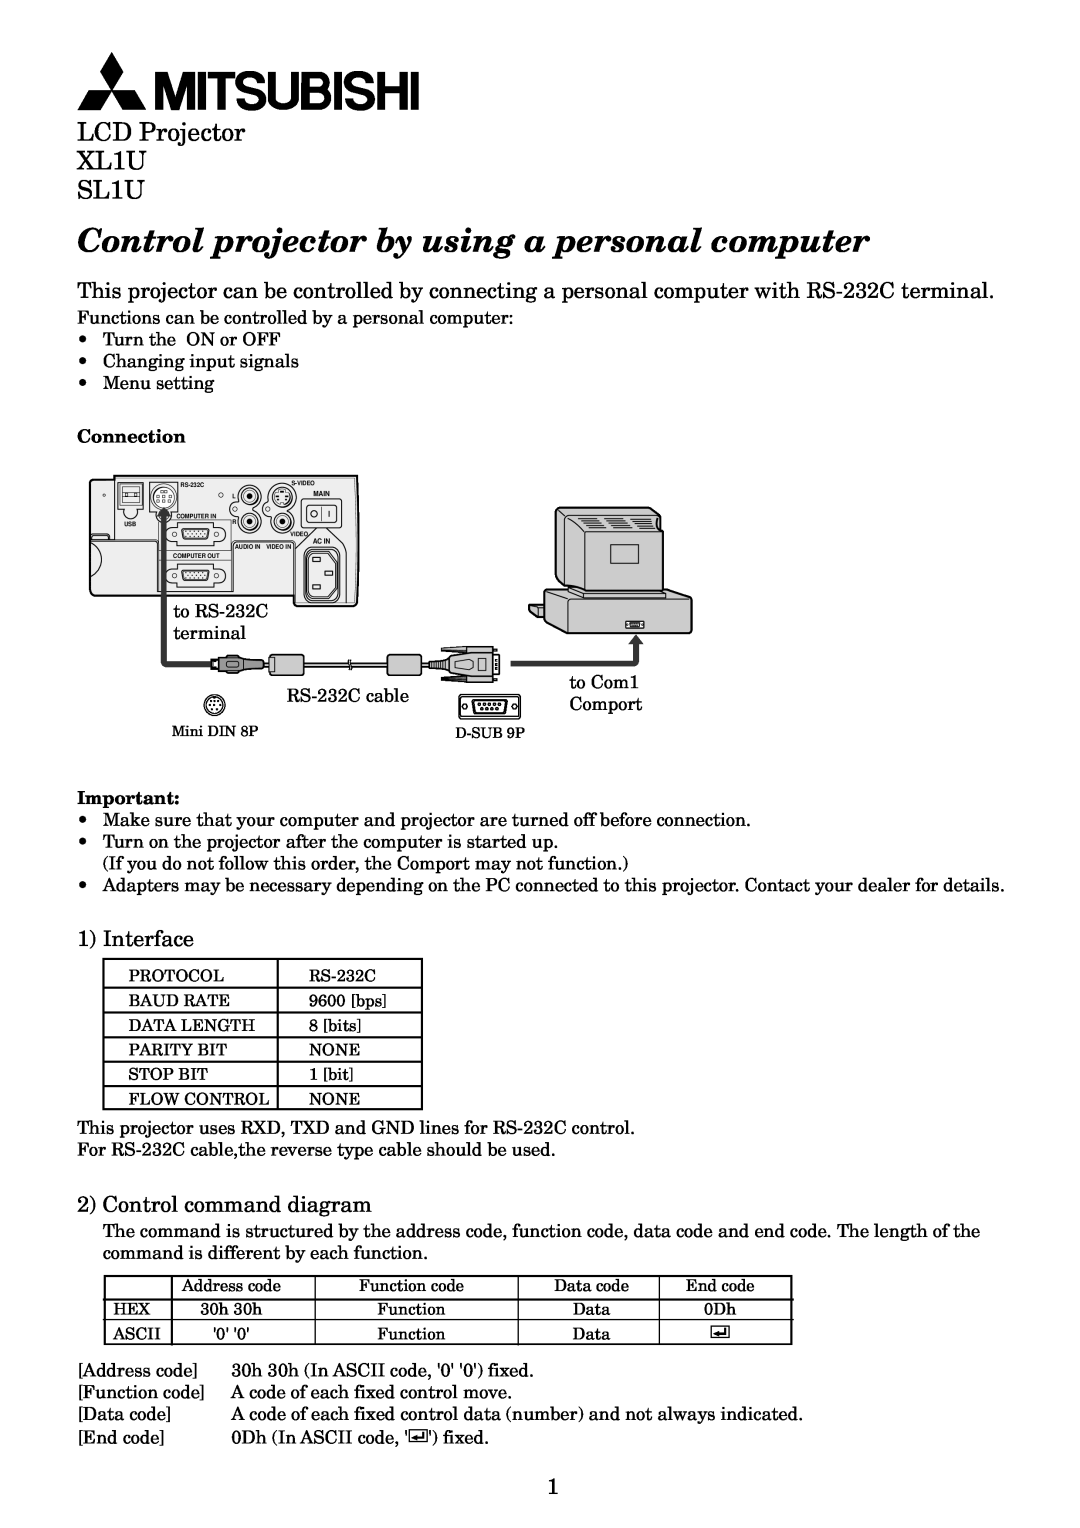 Mitsubishi Electronics user manual Control projector by using a personal computer, LCD Projector XL1U SL1U, Connection 